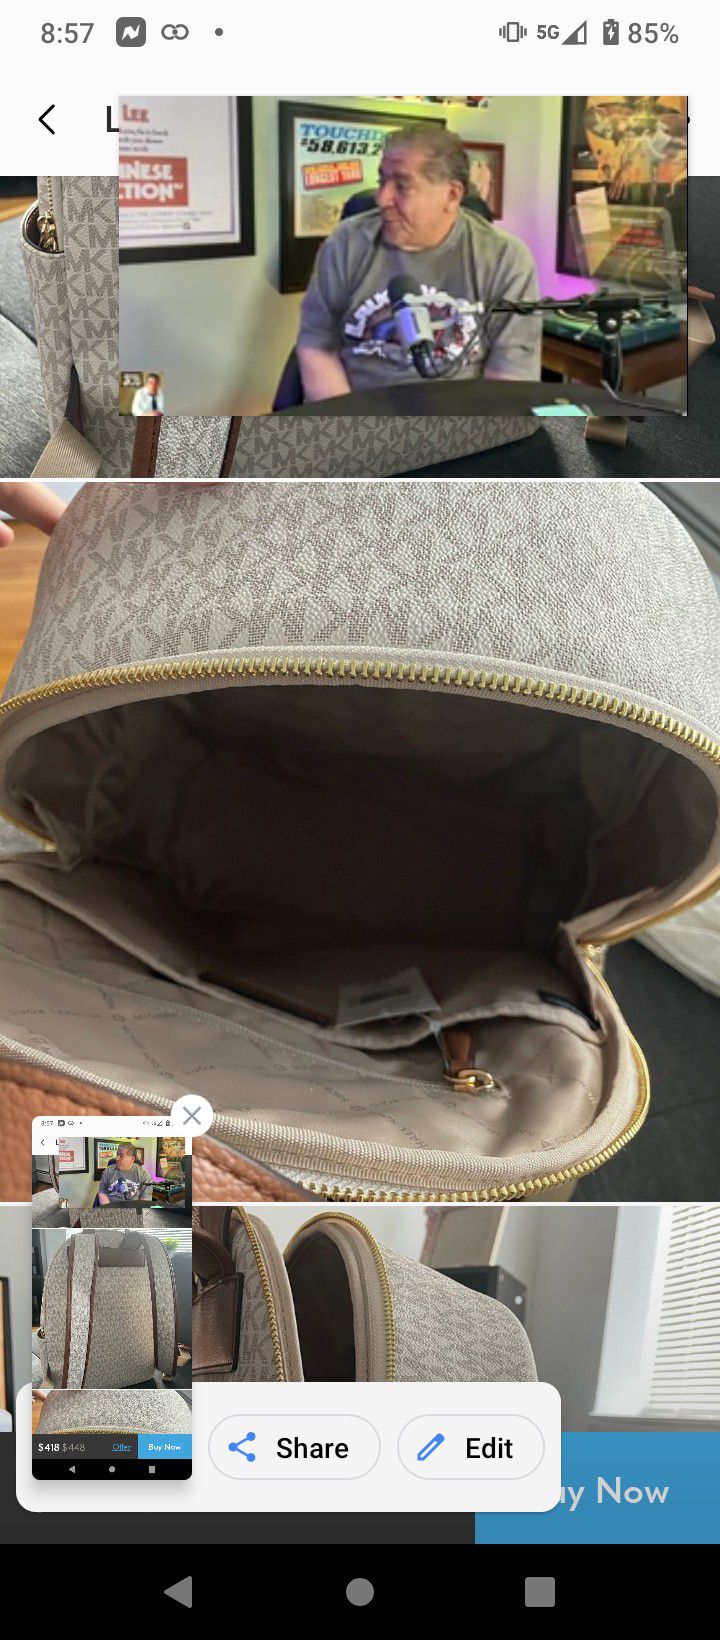 Michael Kors Backpack Purse for Sale in Houston, TX - OfferUp